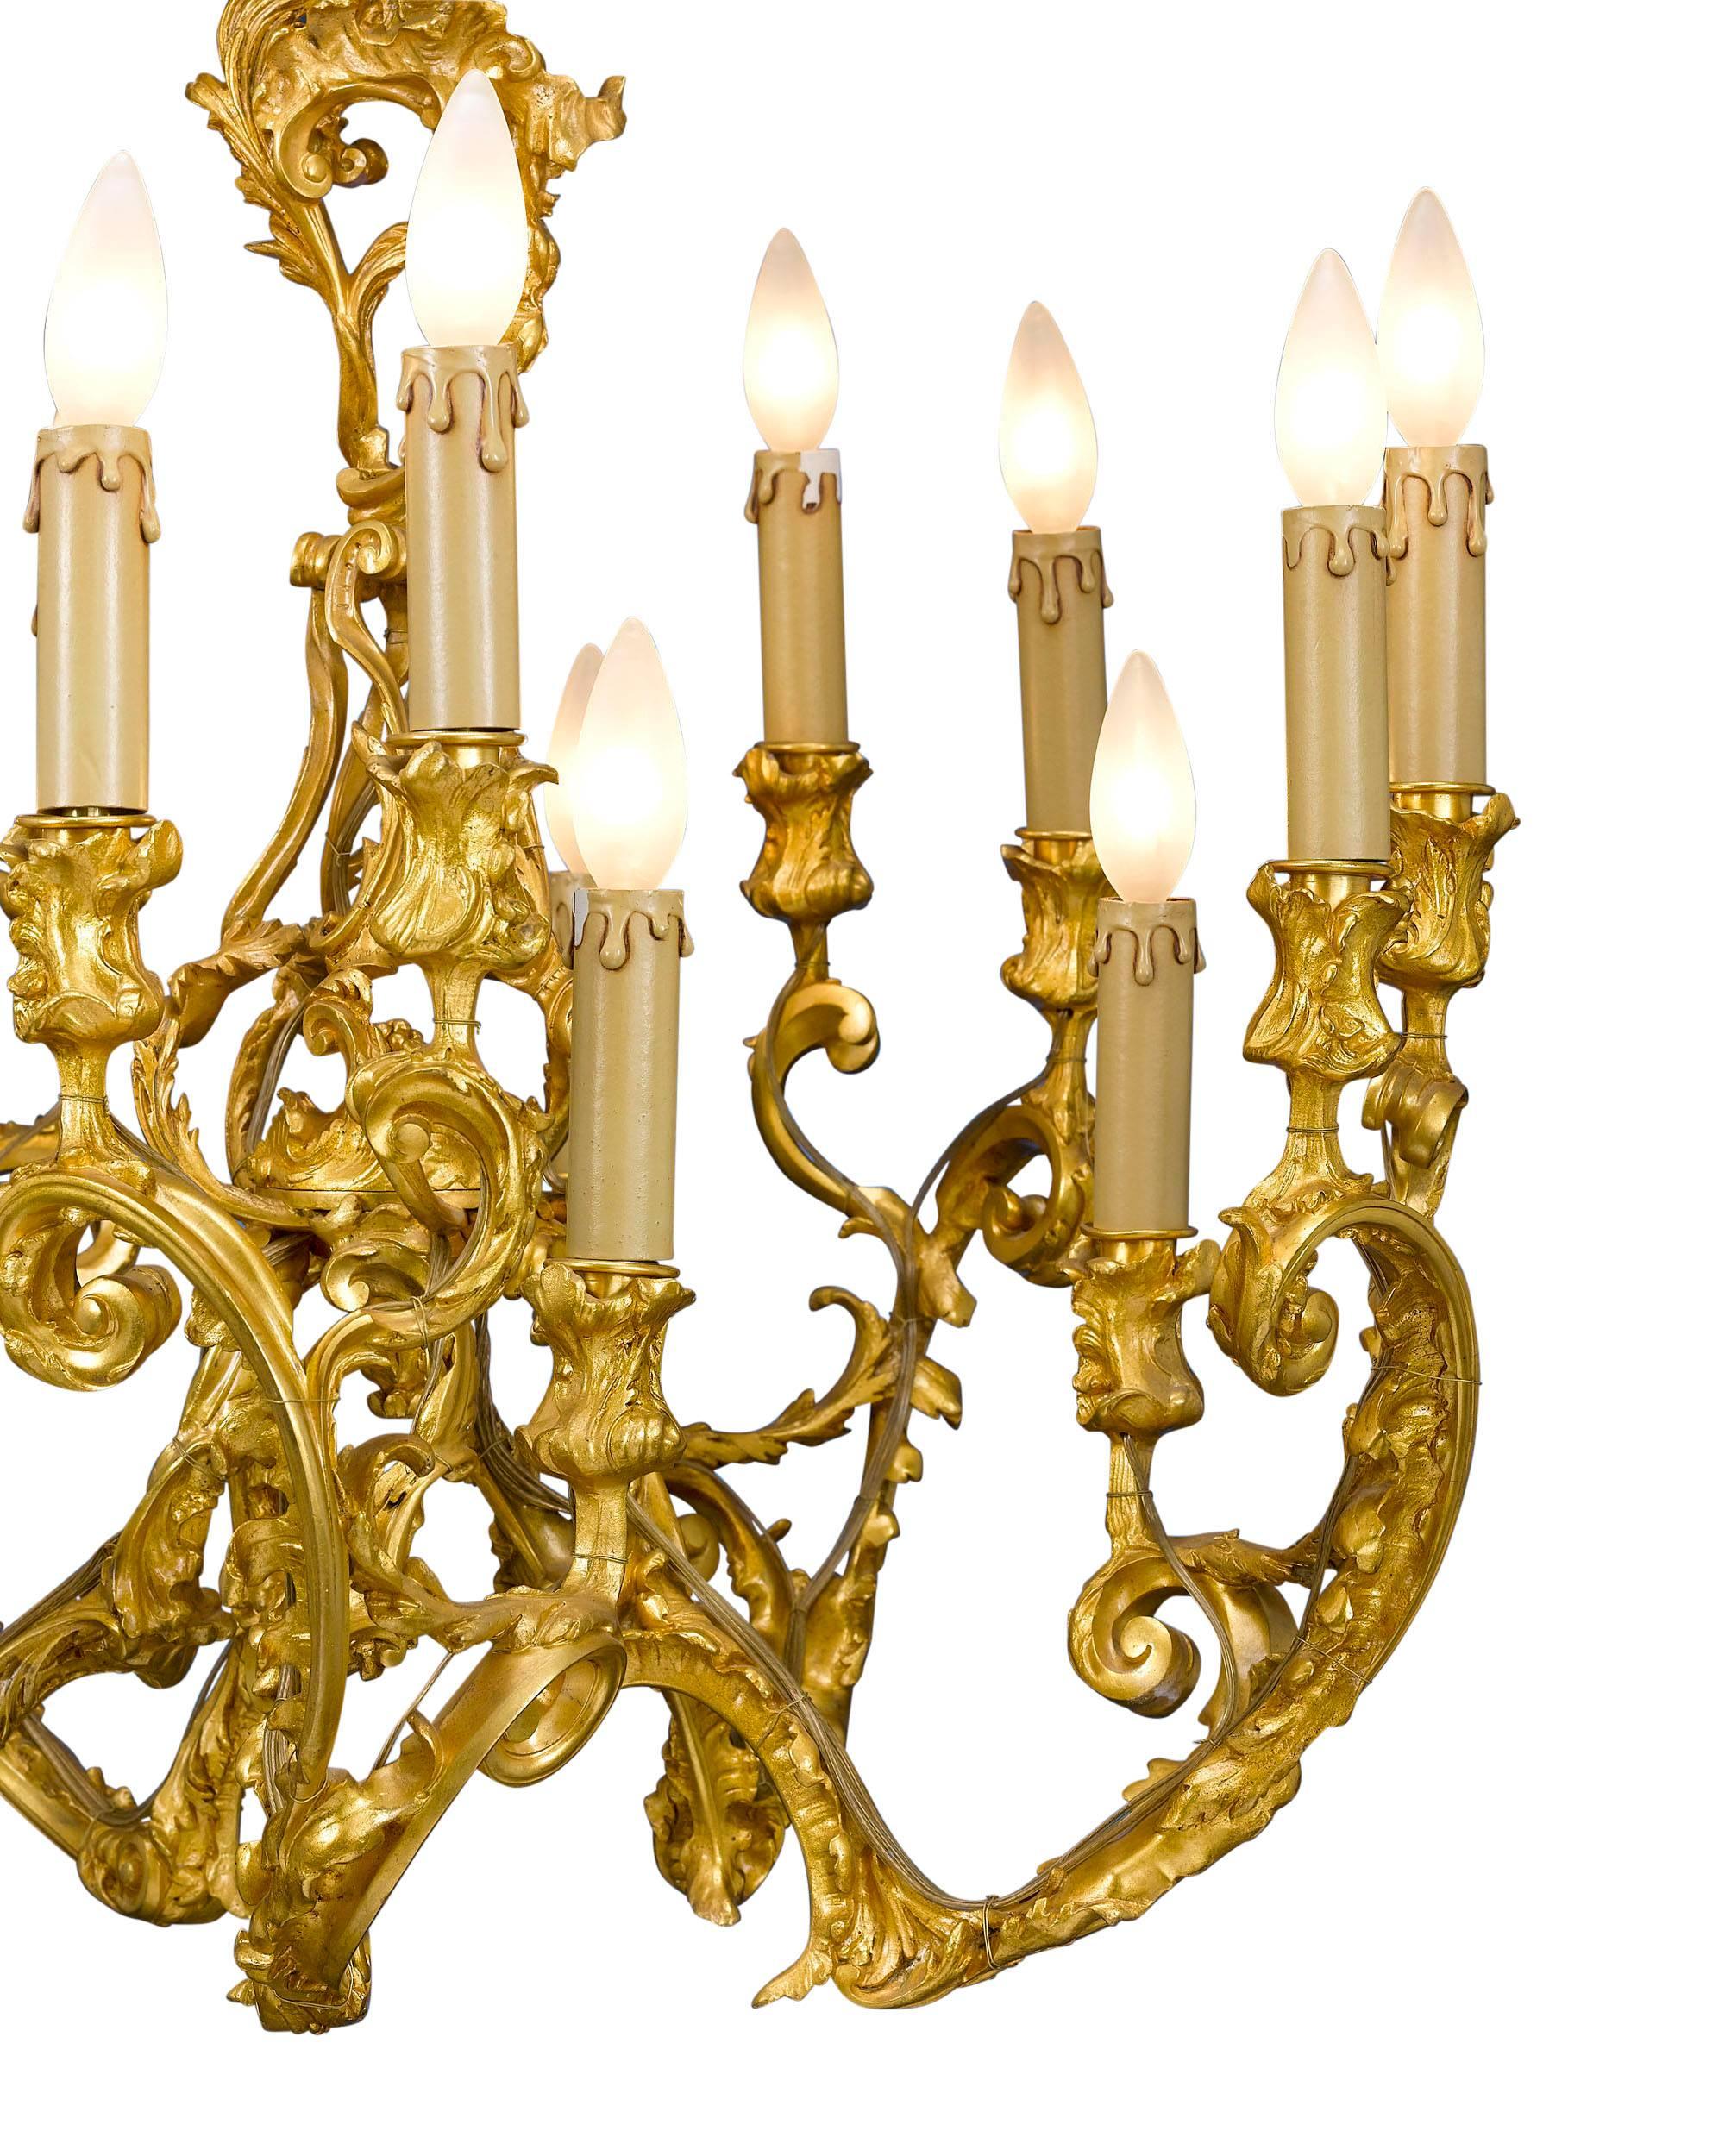 This stunning French bronze ormolu chandelier is almost certainly the work of artist Alexandre Charpentier. Crafted entirely of gilded bronze, this striking light is a masterpiece of the Rococo Revival style. A symphony of asymmetrical curves and